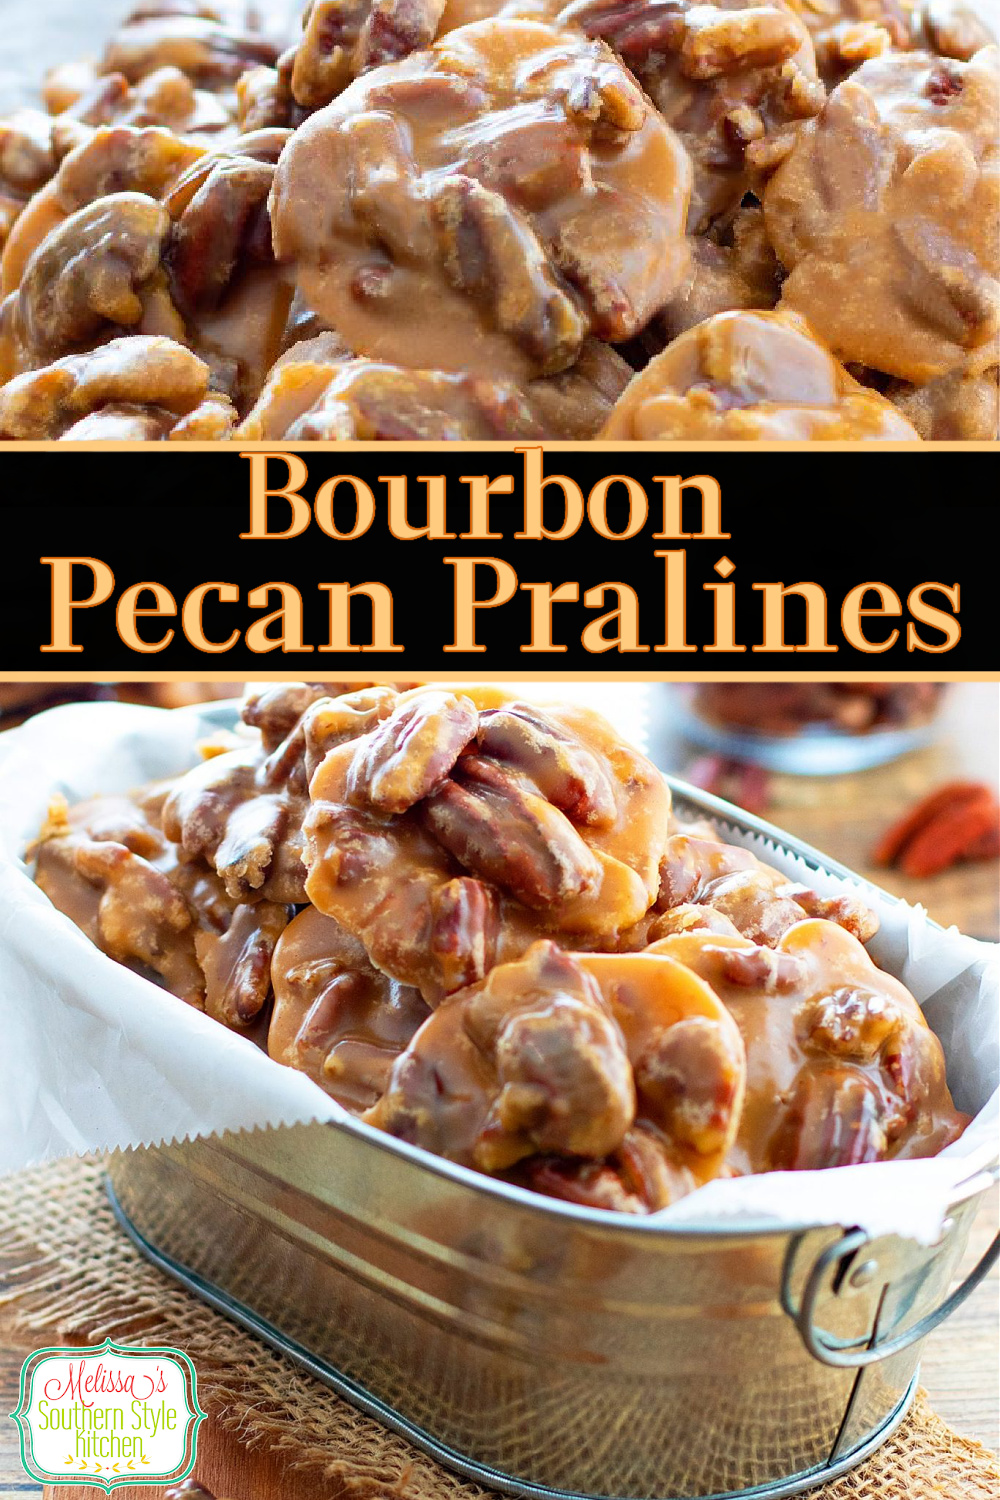 These Bourbon Pecan Pralines are indulgent, and certain to earn a spot on your short list of special occasion sweets #pecanpralines #southernpralinesrecipe #bourbonpecanpralines #pralines #candyrecipes #pecans #southernrecipes #christmascandy #mardisgras via @melissasssk